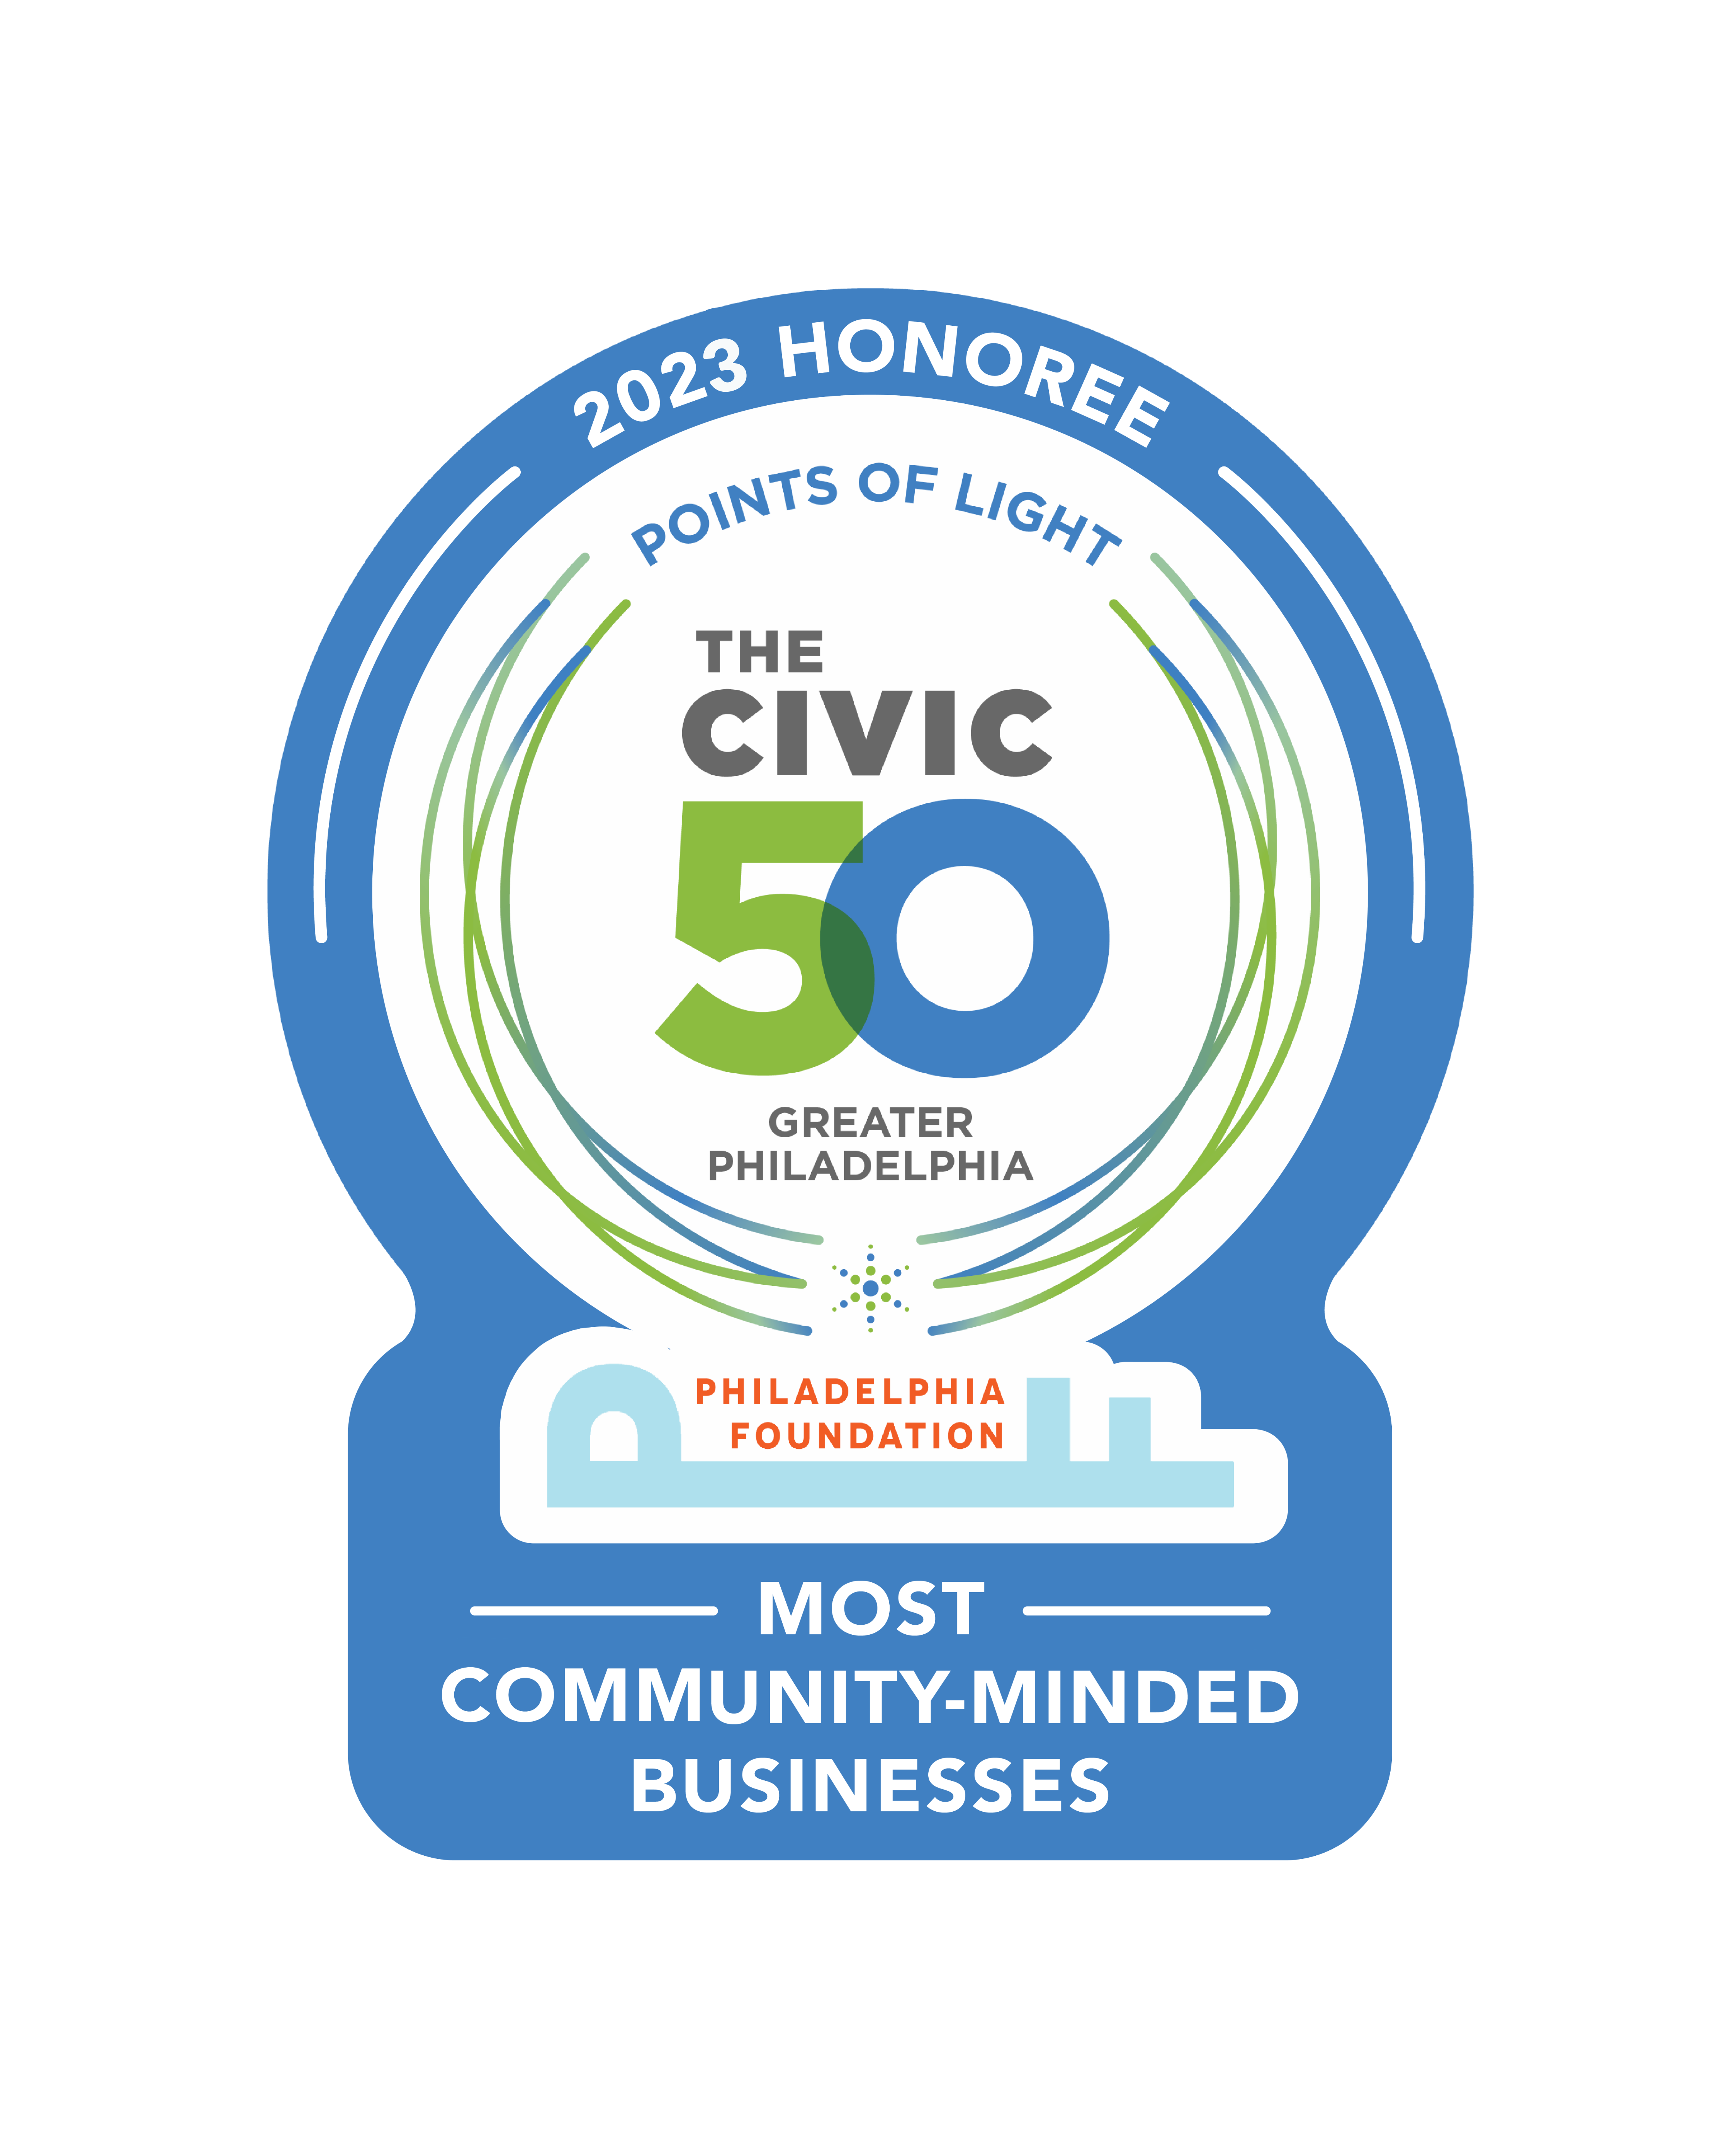 2023 Honoree Points of Light. The Civic 50 Greater Philadelphia, Philadelphia Foundation. Most Community-Minded Business